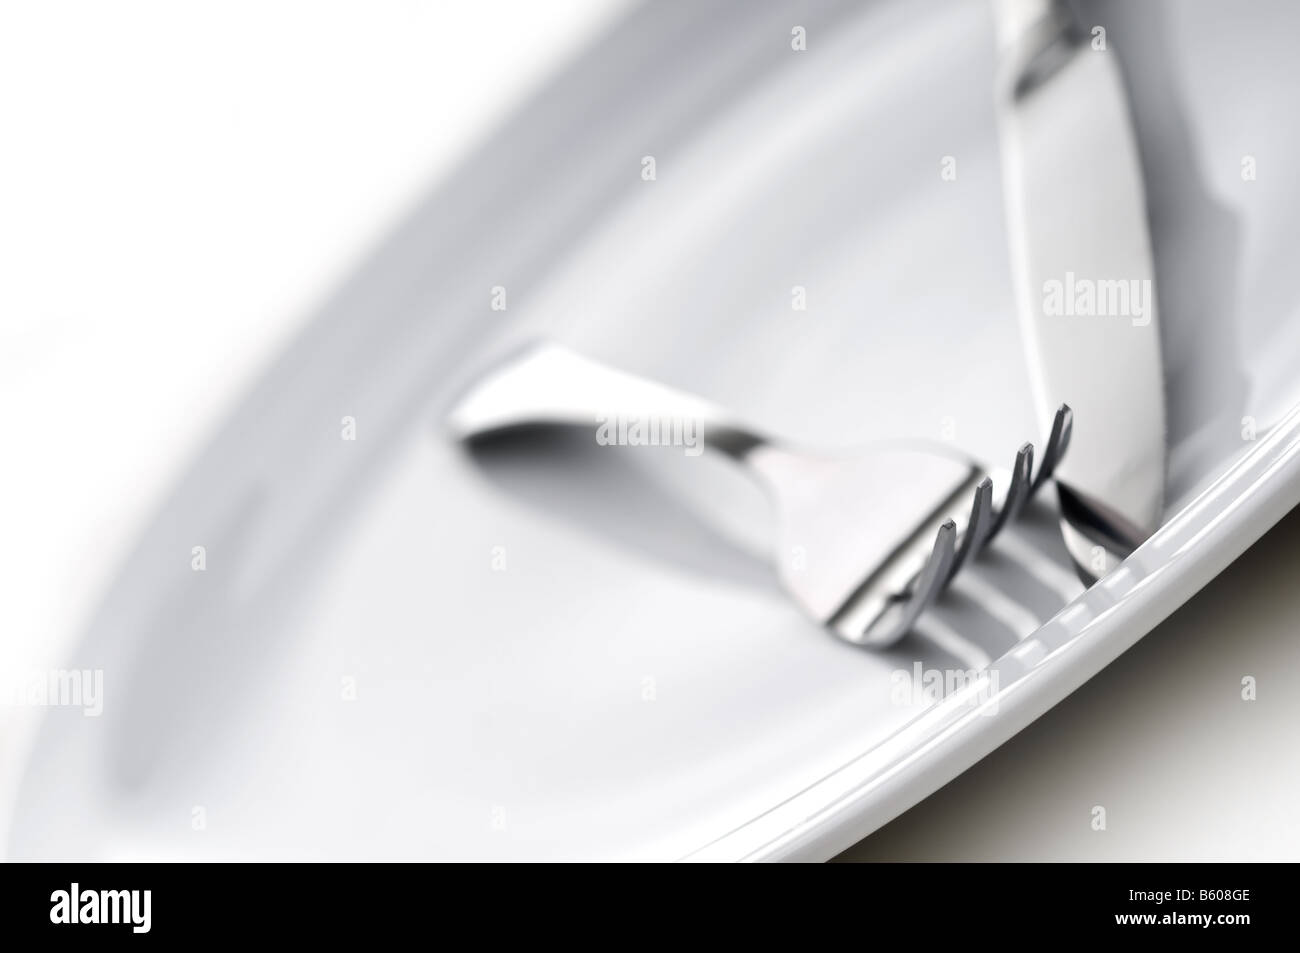 shallow focus silverware on a plate Stock Photo